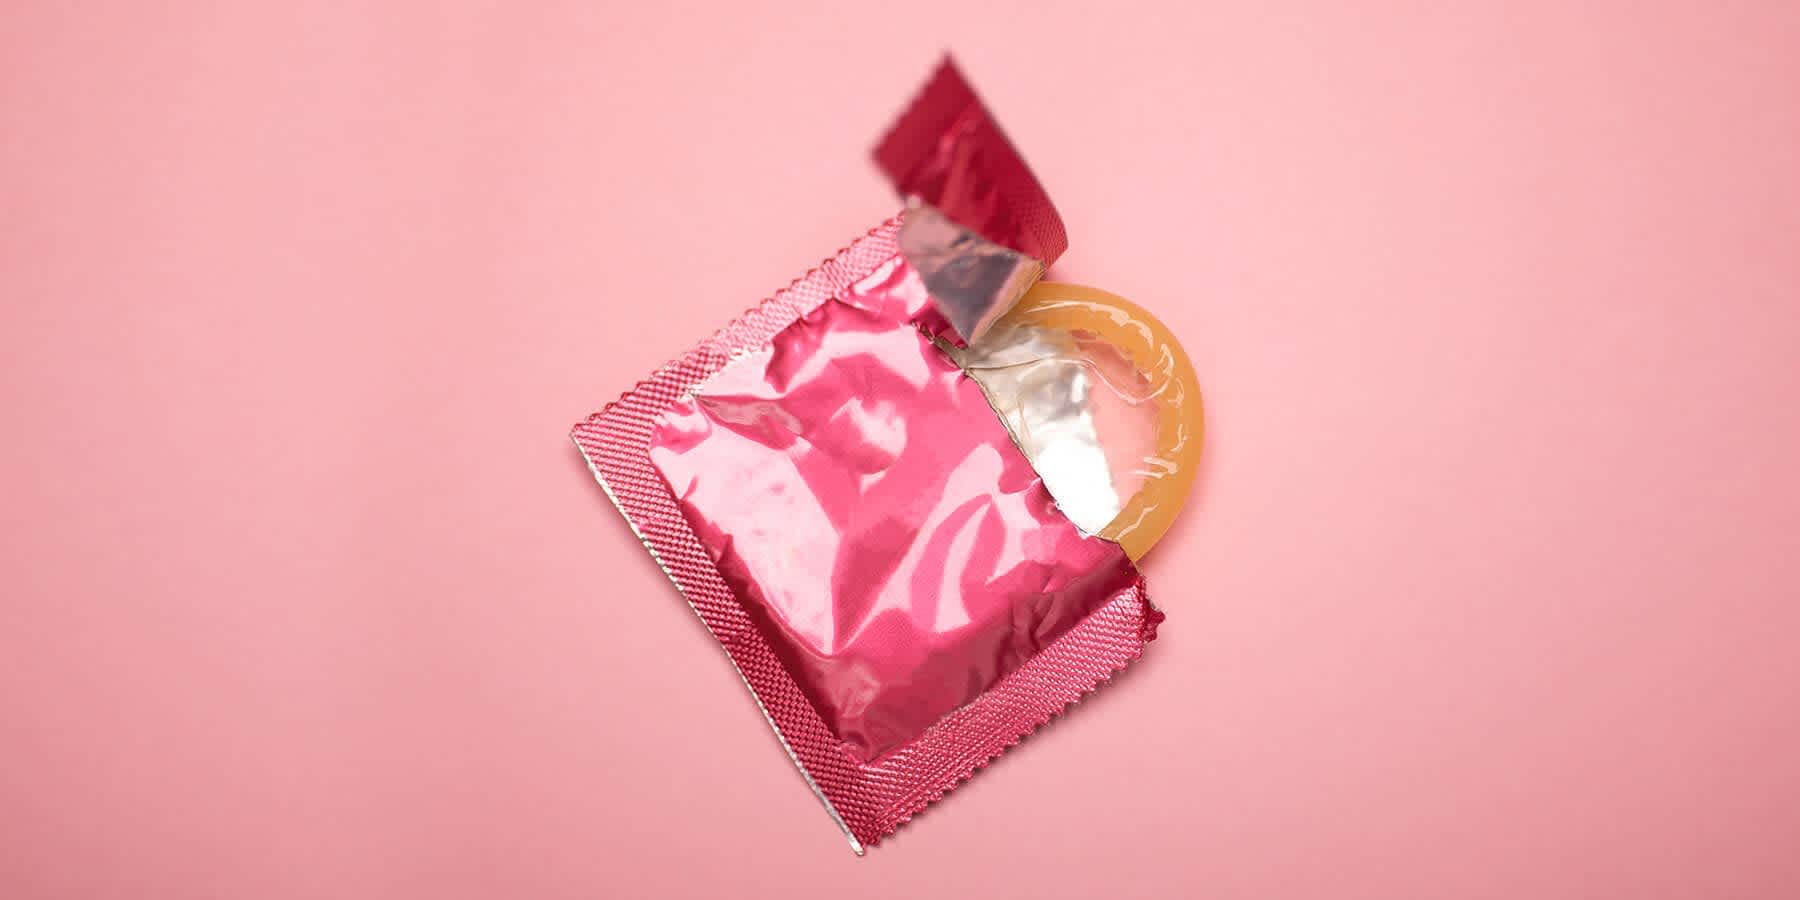 Condom inside opened wrapper to represent unprotected sex